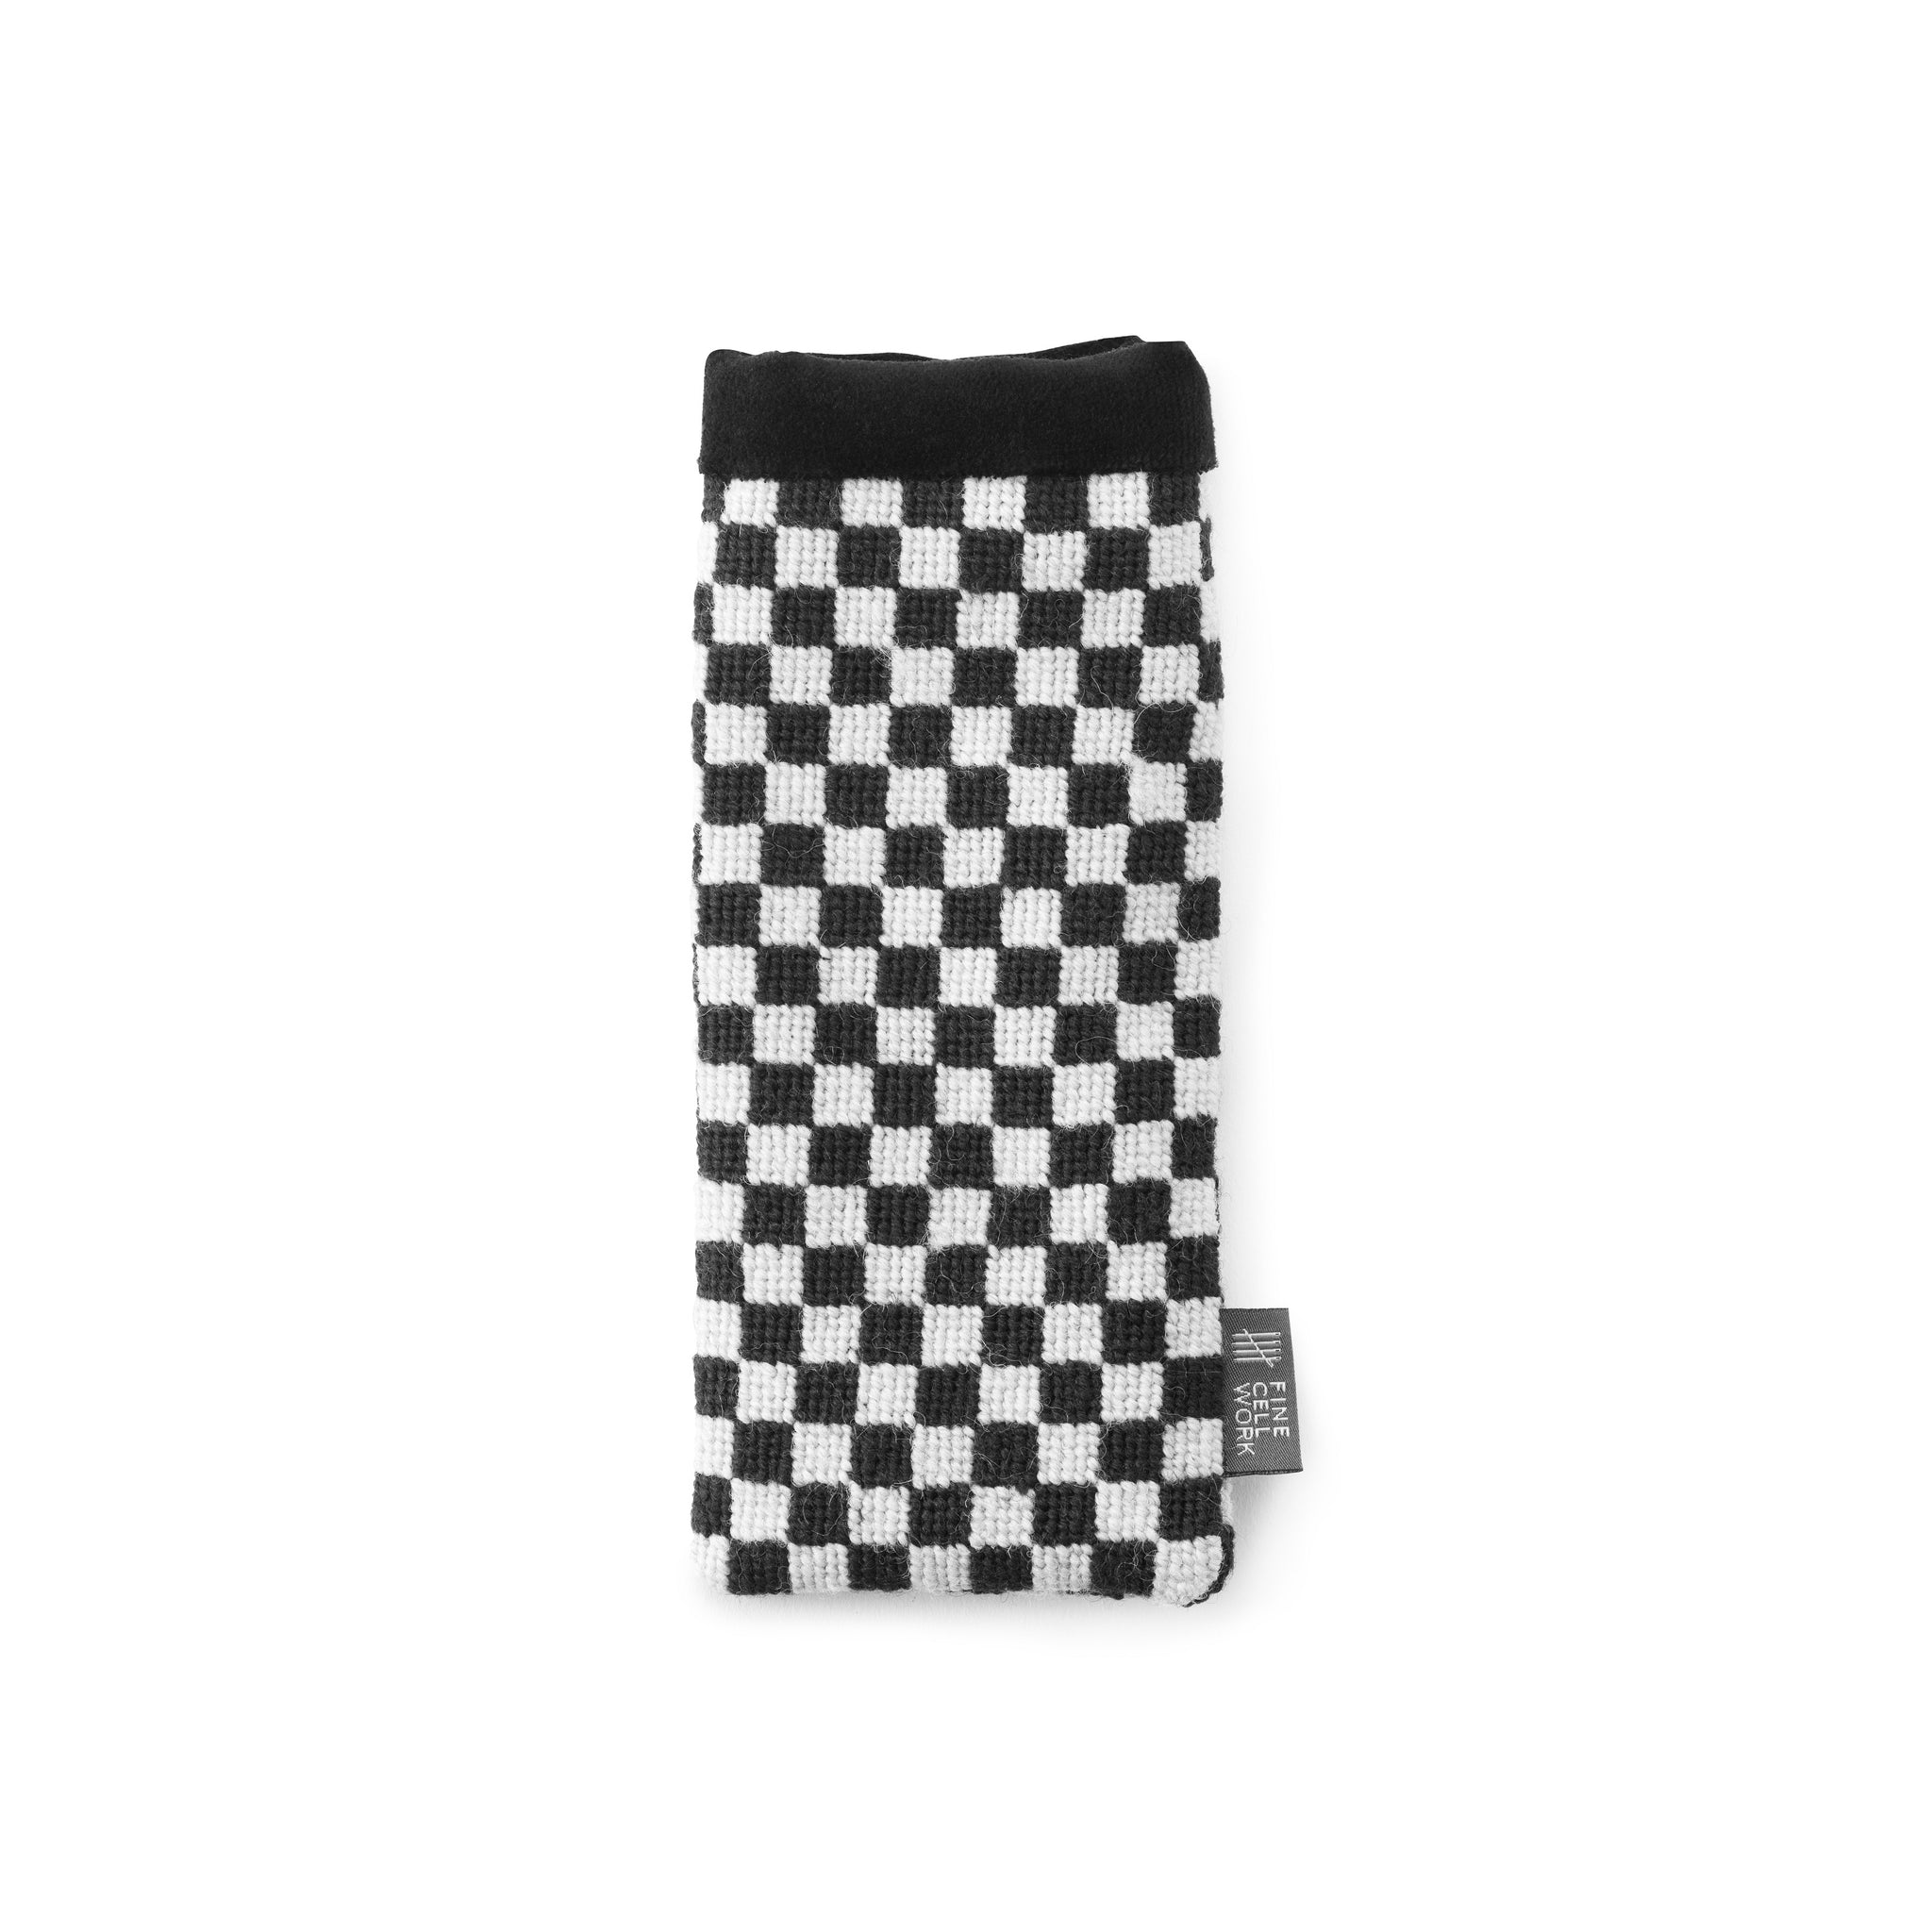 Silverstone Black and White Needlepoint Chequerboard Glasses Case Cath Kidston for Fine Cell Work